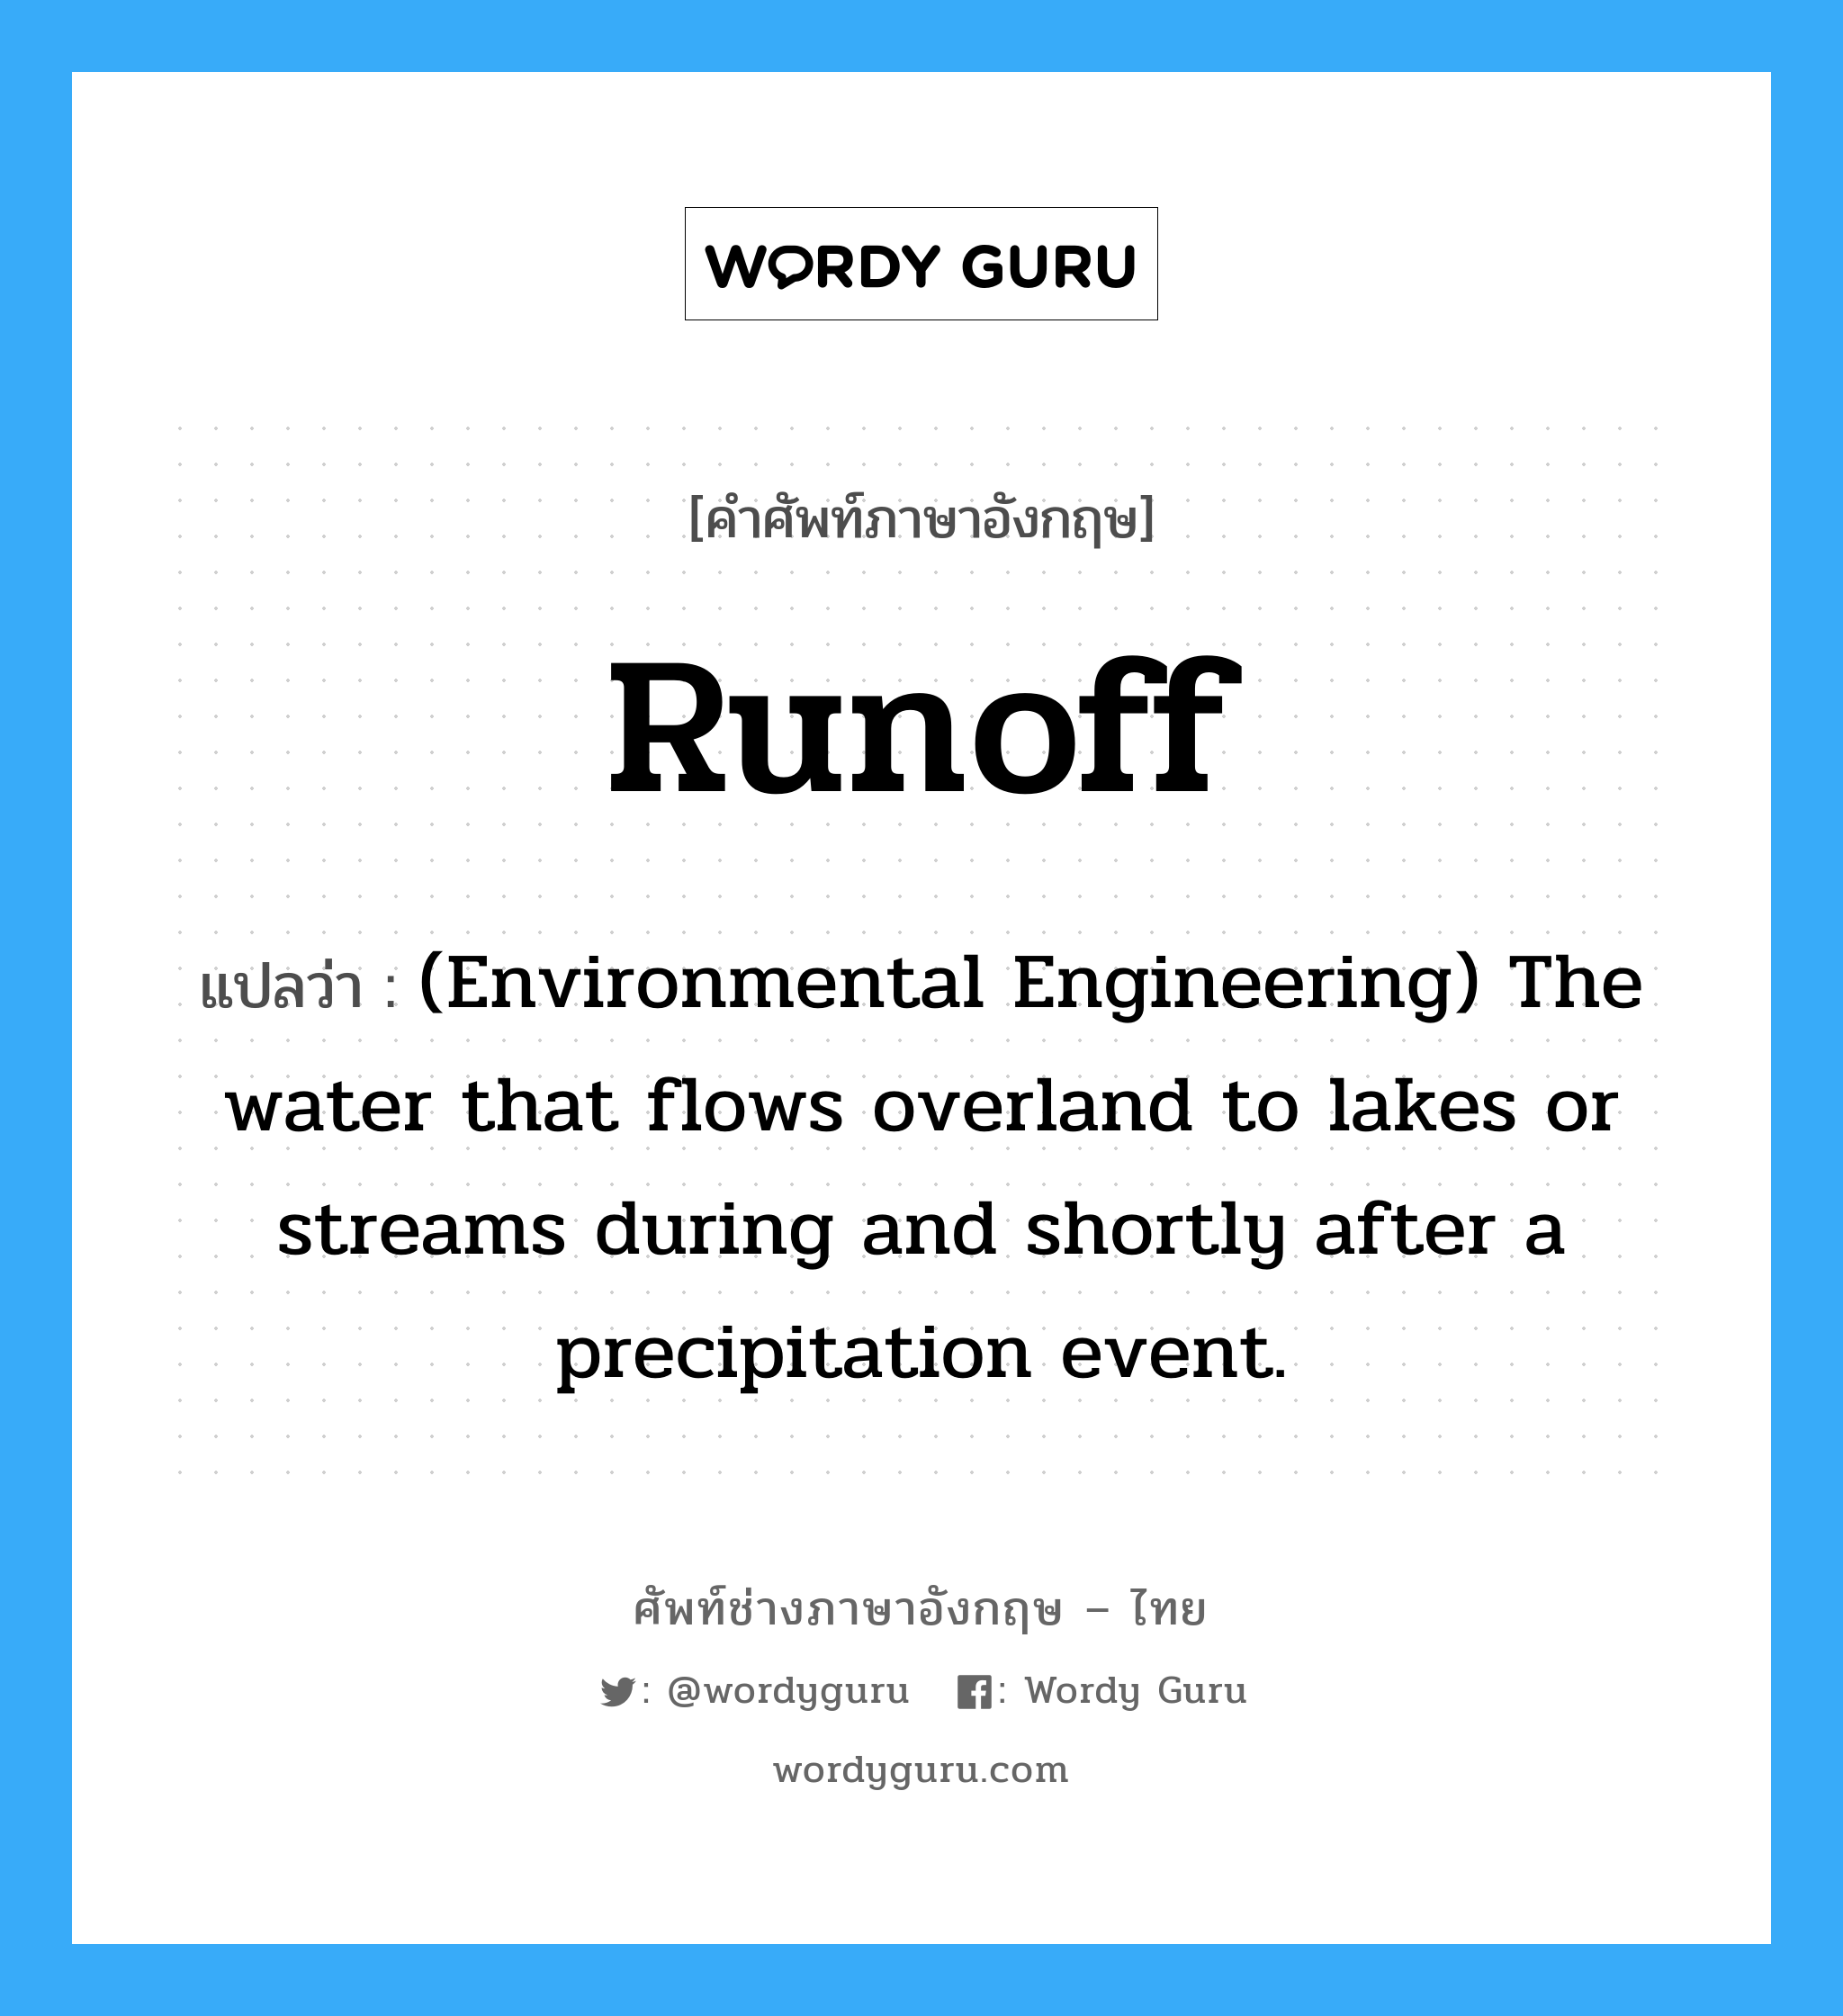 Runoff แปลว่า?, คำศัพท์ช่างภาษาอังกฤษ - ไทย Runoff คำศัพท์ภาษาอังกฤษ Runoff แปลว่า (Environmental Engineering) The water that flows overland to lakes or streams during and shortly after a precipitation event.